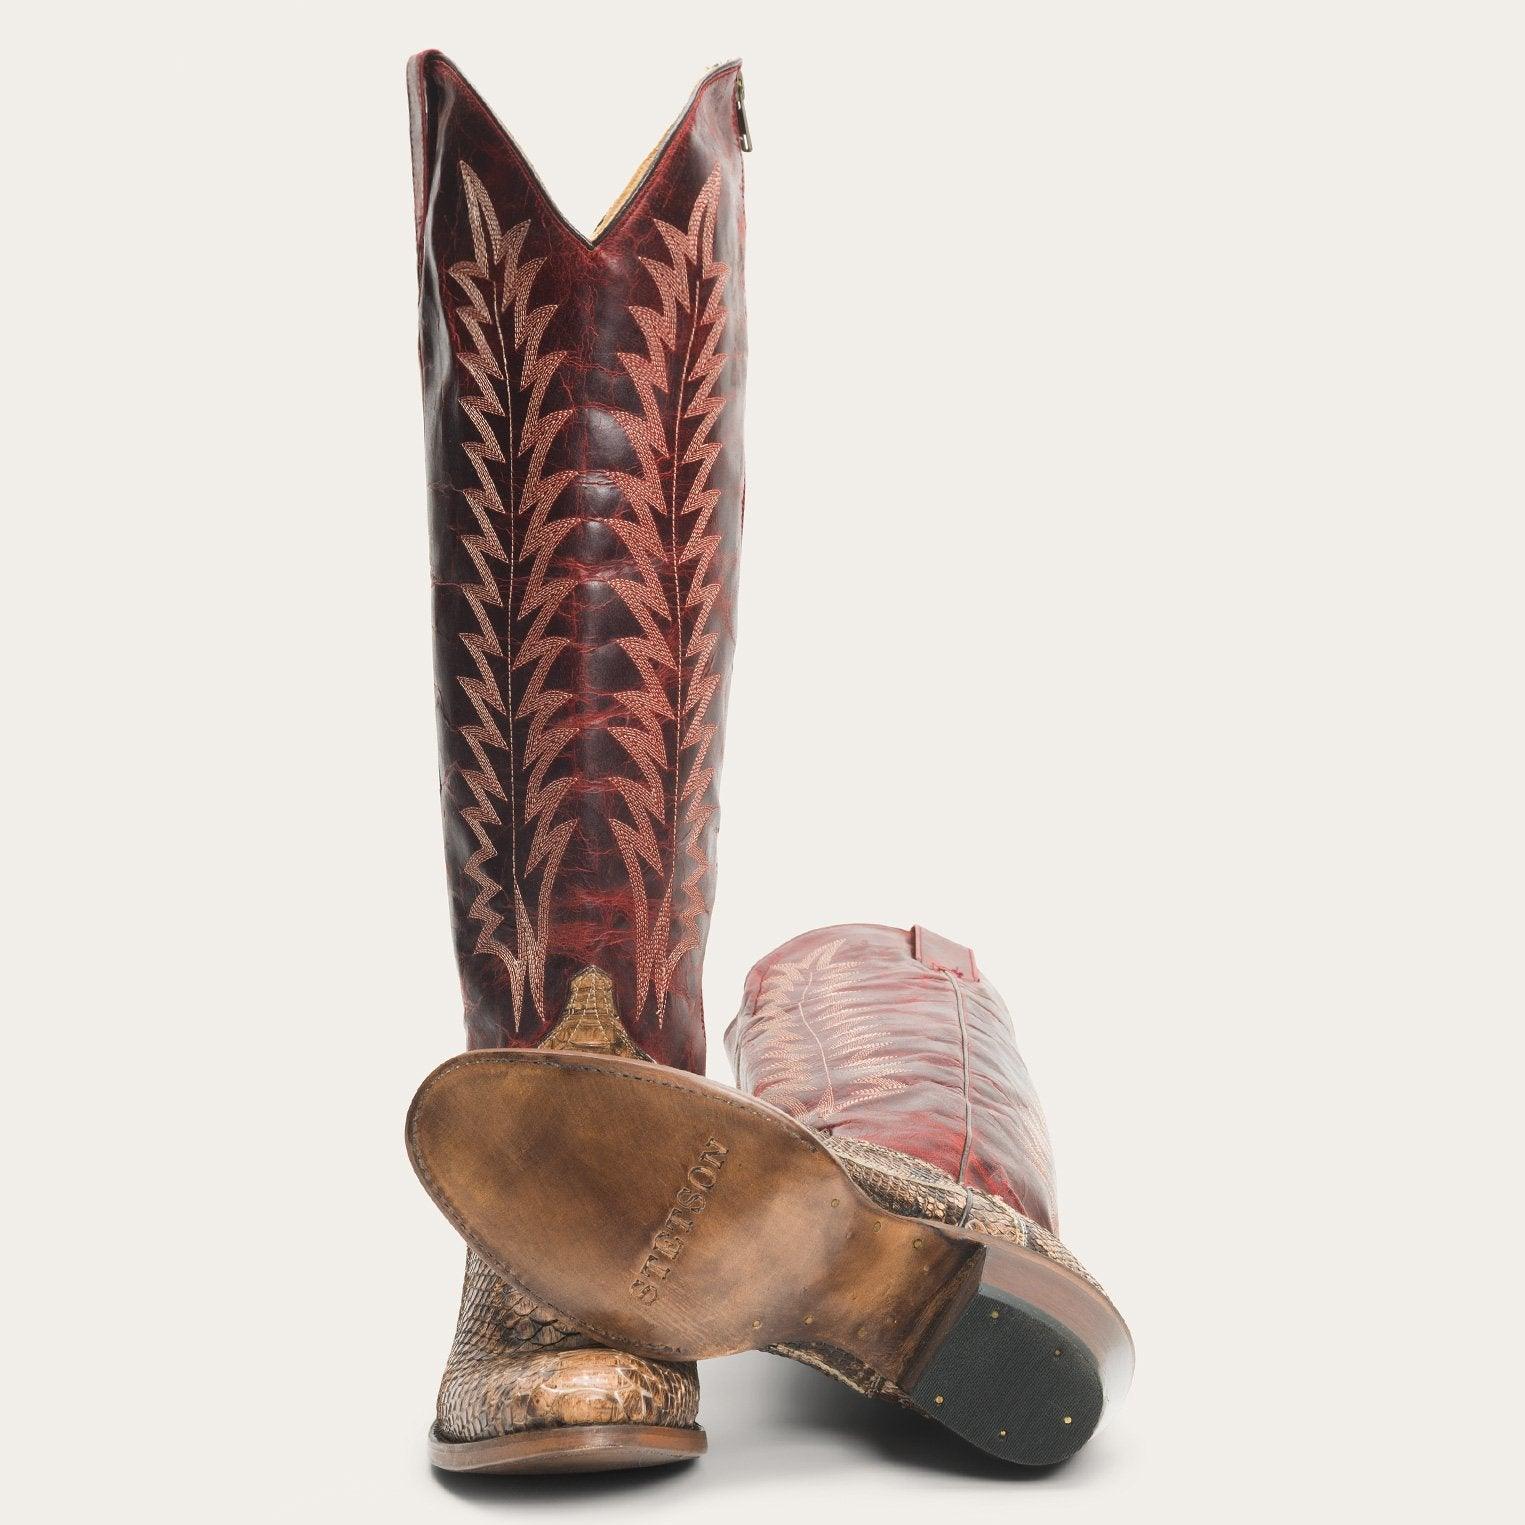 Stetson Ruby Boots - Flyclothing LLC